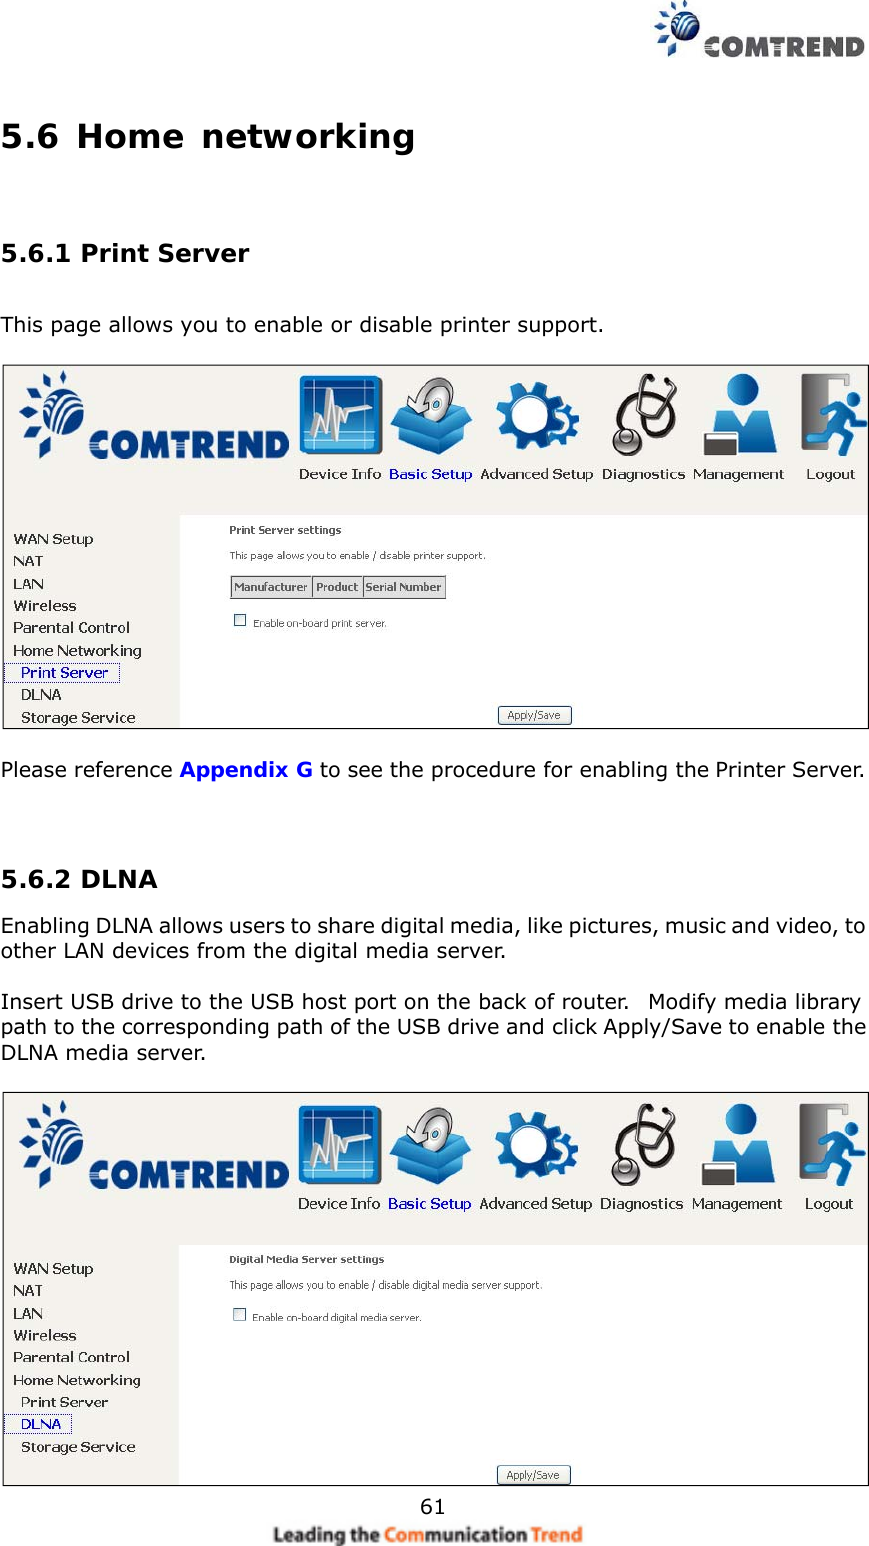    615.6 Home networking  5.6.1 Print Server  This page allows you to enable or disable printer support.    Please reference Appendix G to see the procedure for enabling the Printer Server.    5.6.2 DLNA Enabling DLNA allows users to share digital media, like pictures, music and video, to other LAN devices from the digital media server.  Insert USB drive to the USB host port on the back of router.   Modify media library path to the corresponding path of the USB drive and click Apply/Save to enable the DLNA media server.   